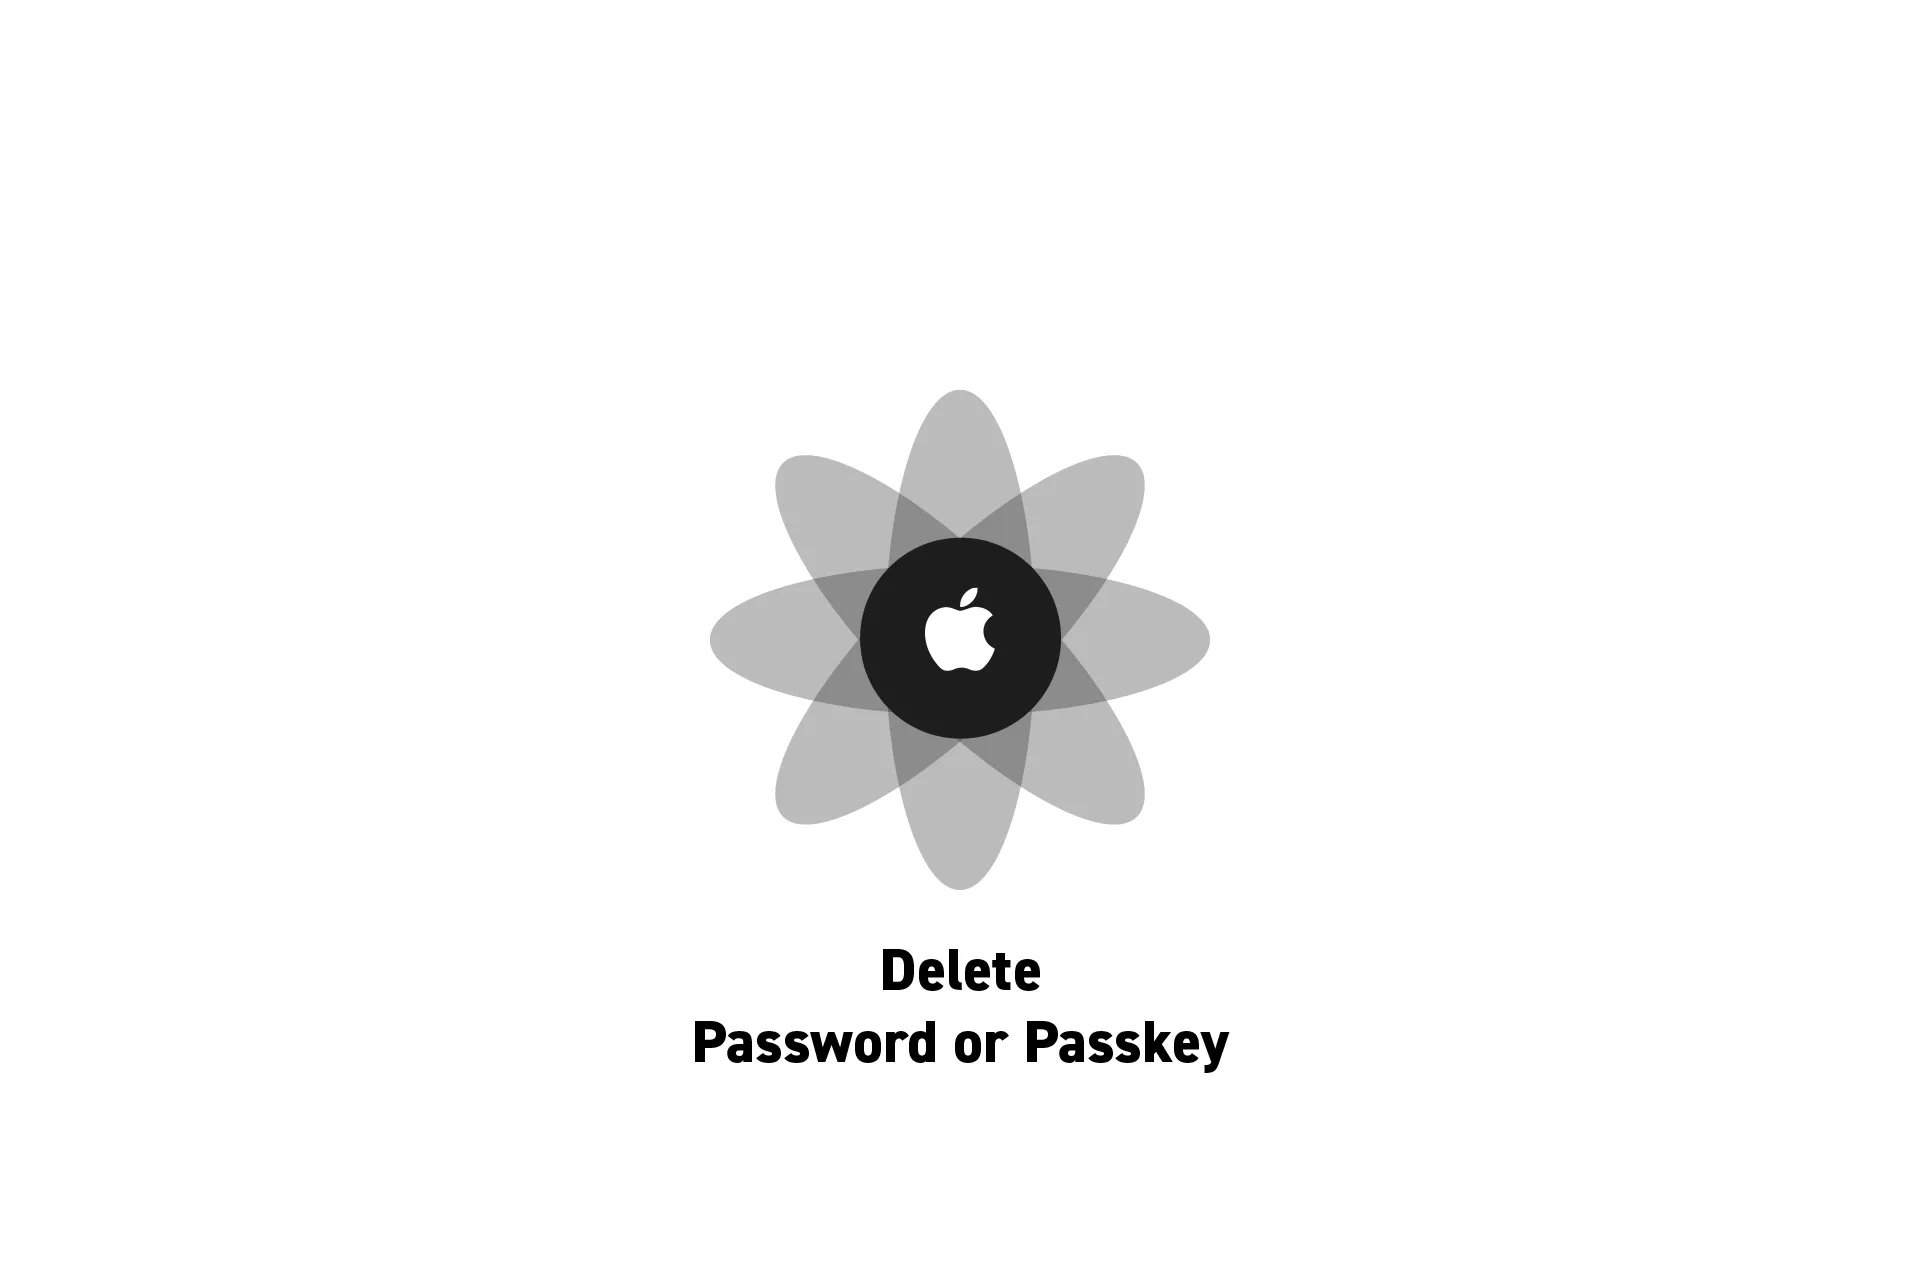 A flower that represents Apple with the text "Delete Password or Passkey" beneath it.